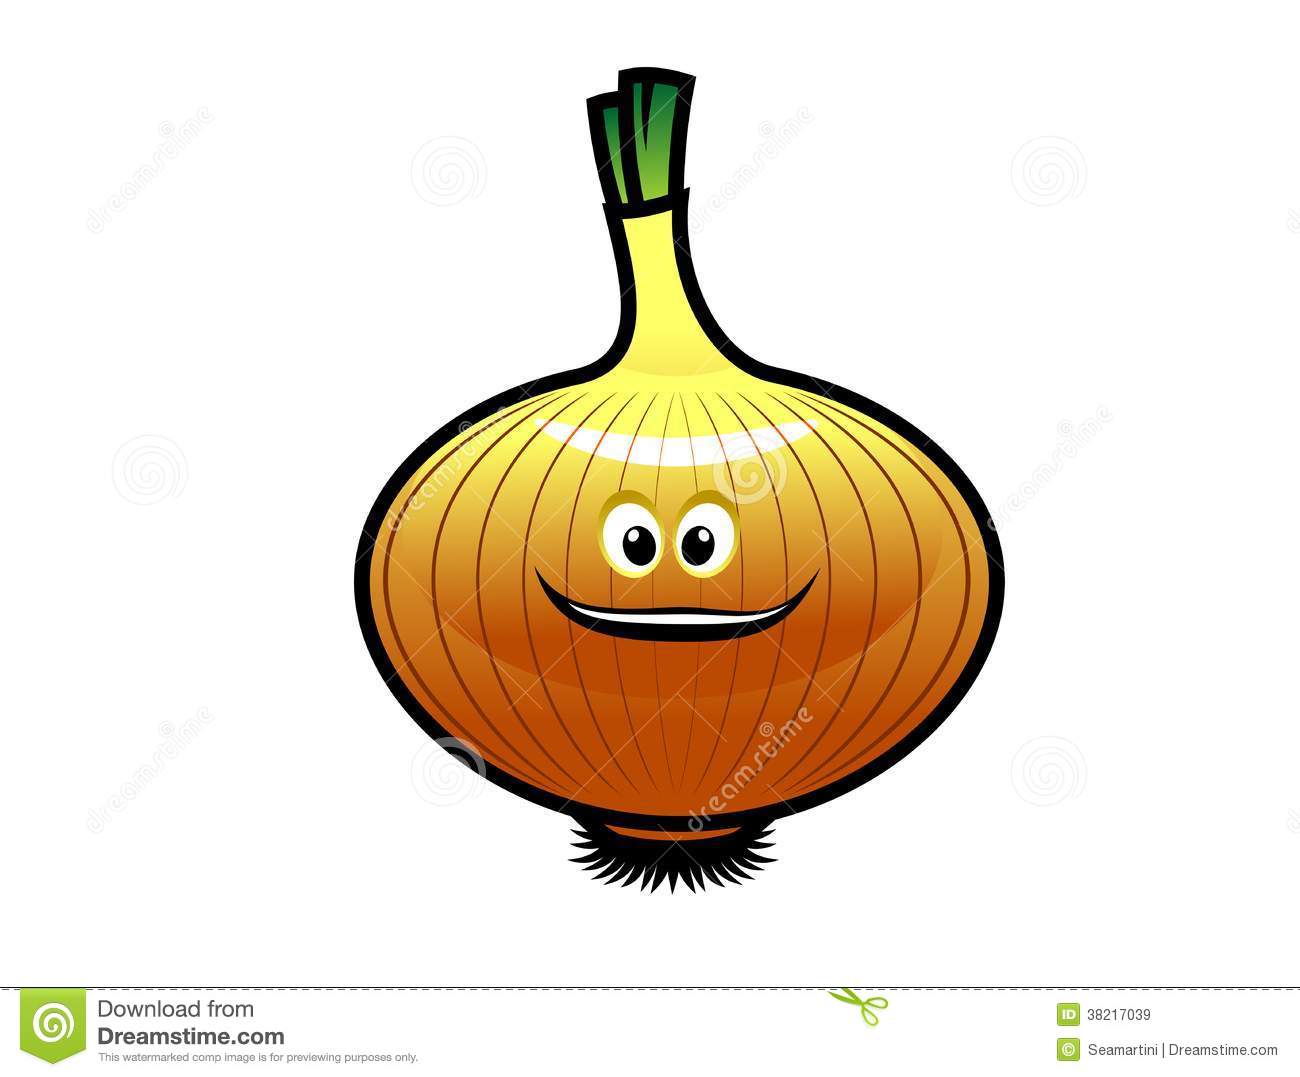 Cheeky Little Cartoon Golden Onion With A Happy Grin Isolated On White